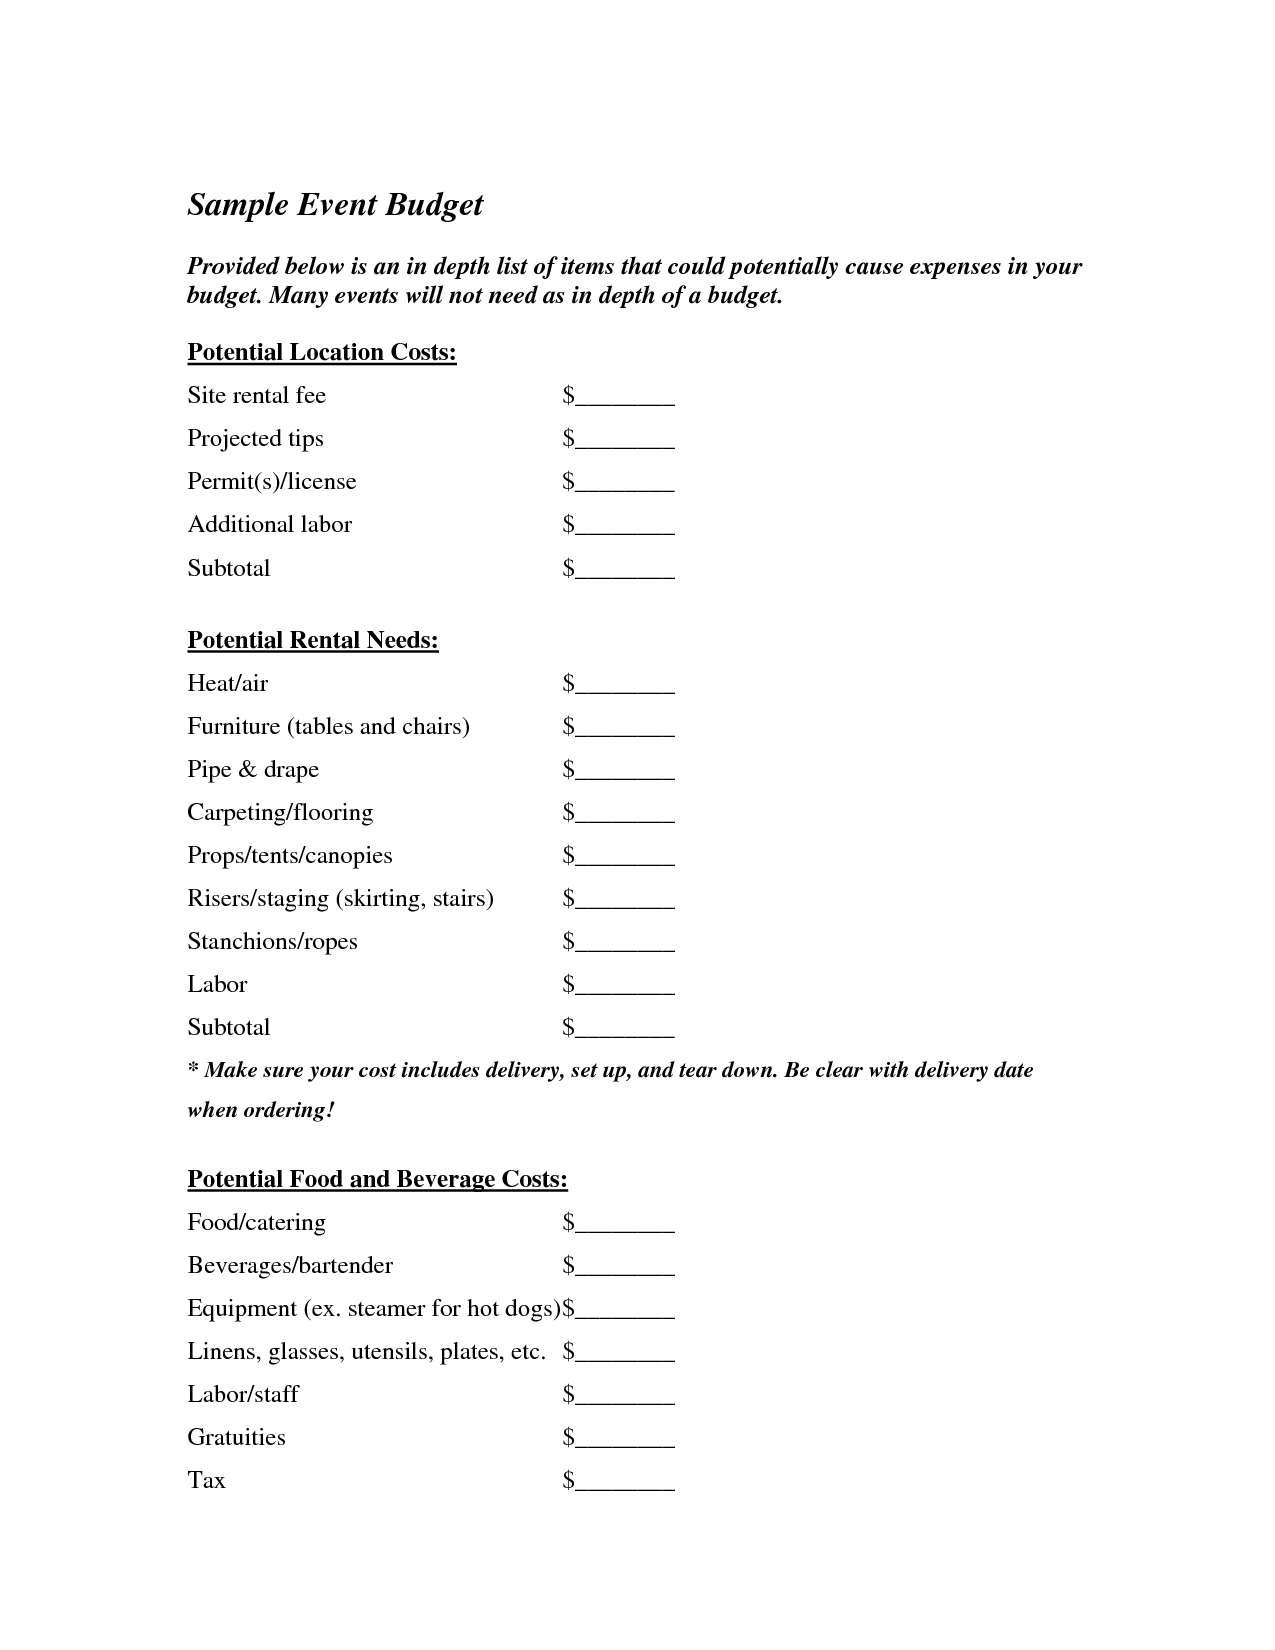 Sample Event Budget Template Image